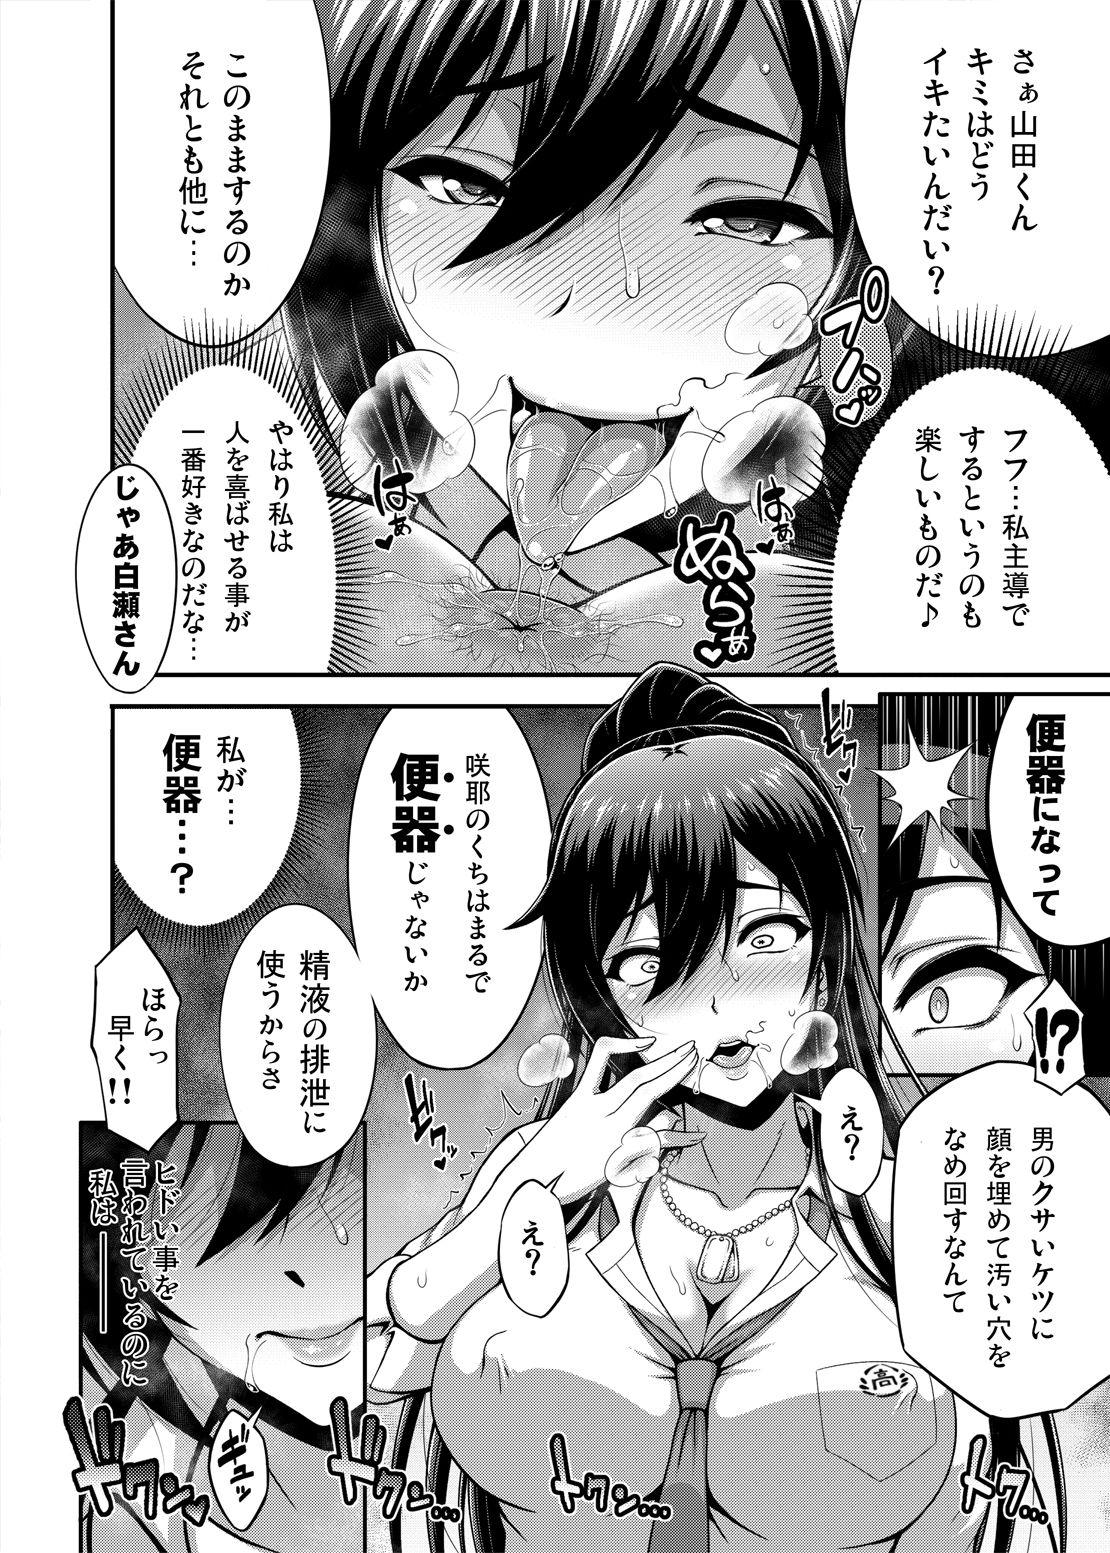 Funny SSR 3 - The idolmaster Abg - Page 3